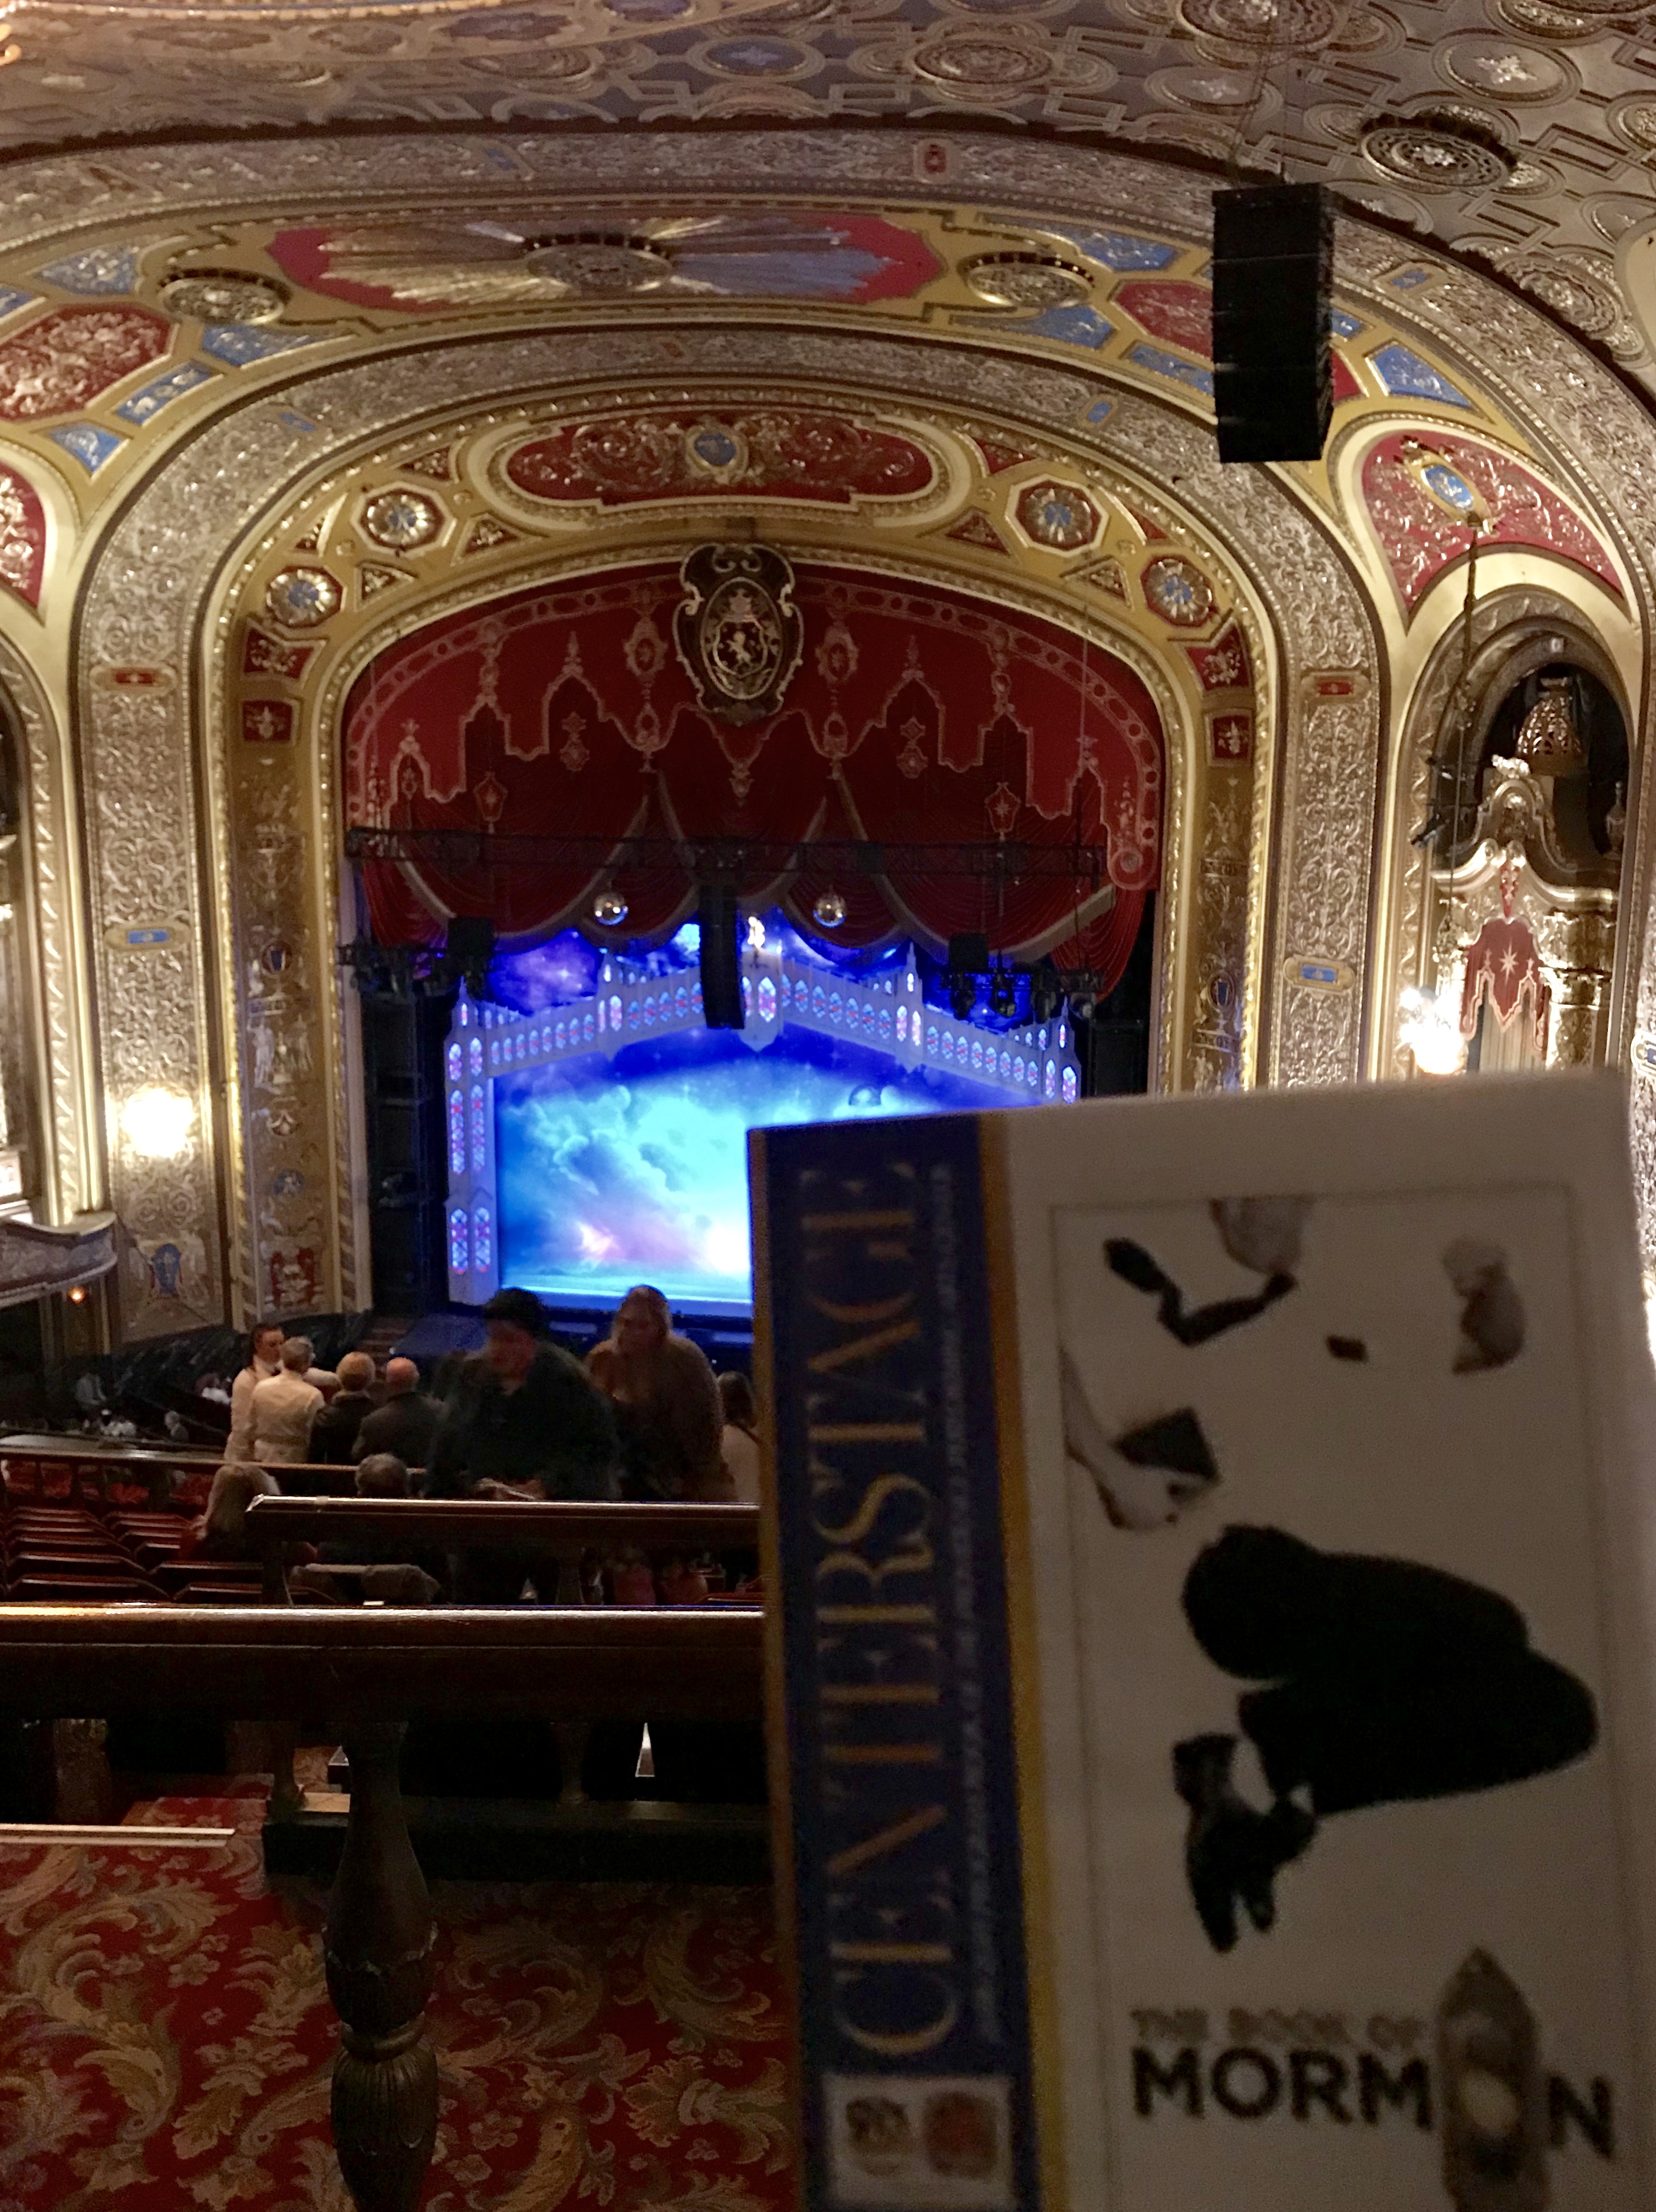 The performing arts center in Providence gets all the best shows.  We saw Book of Mormon.